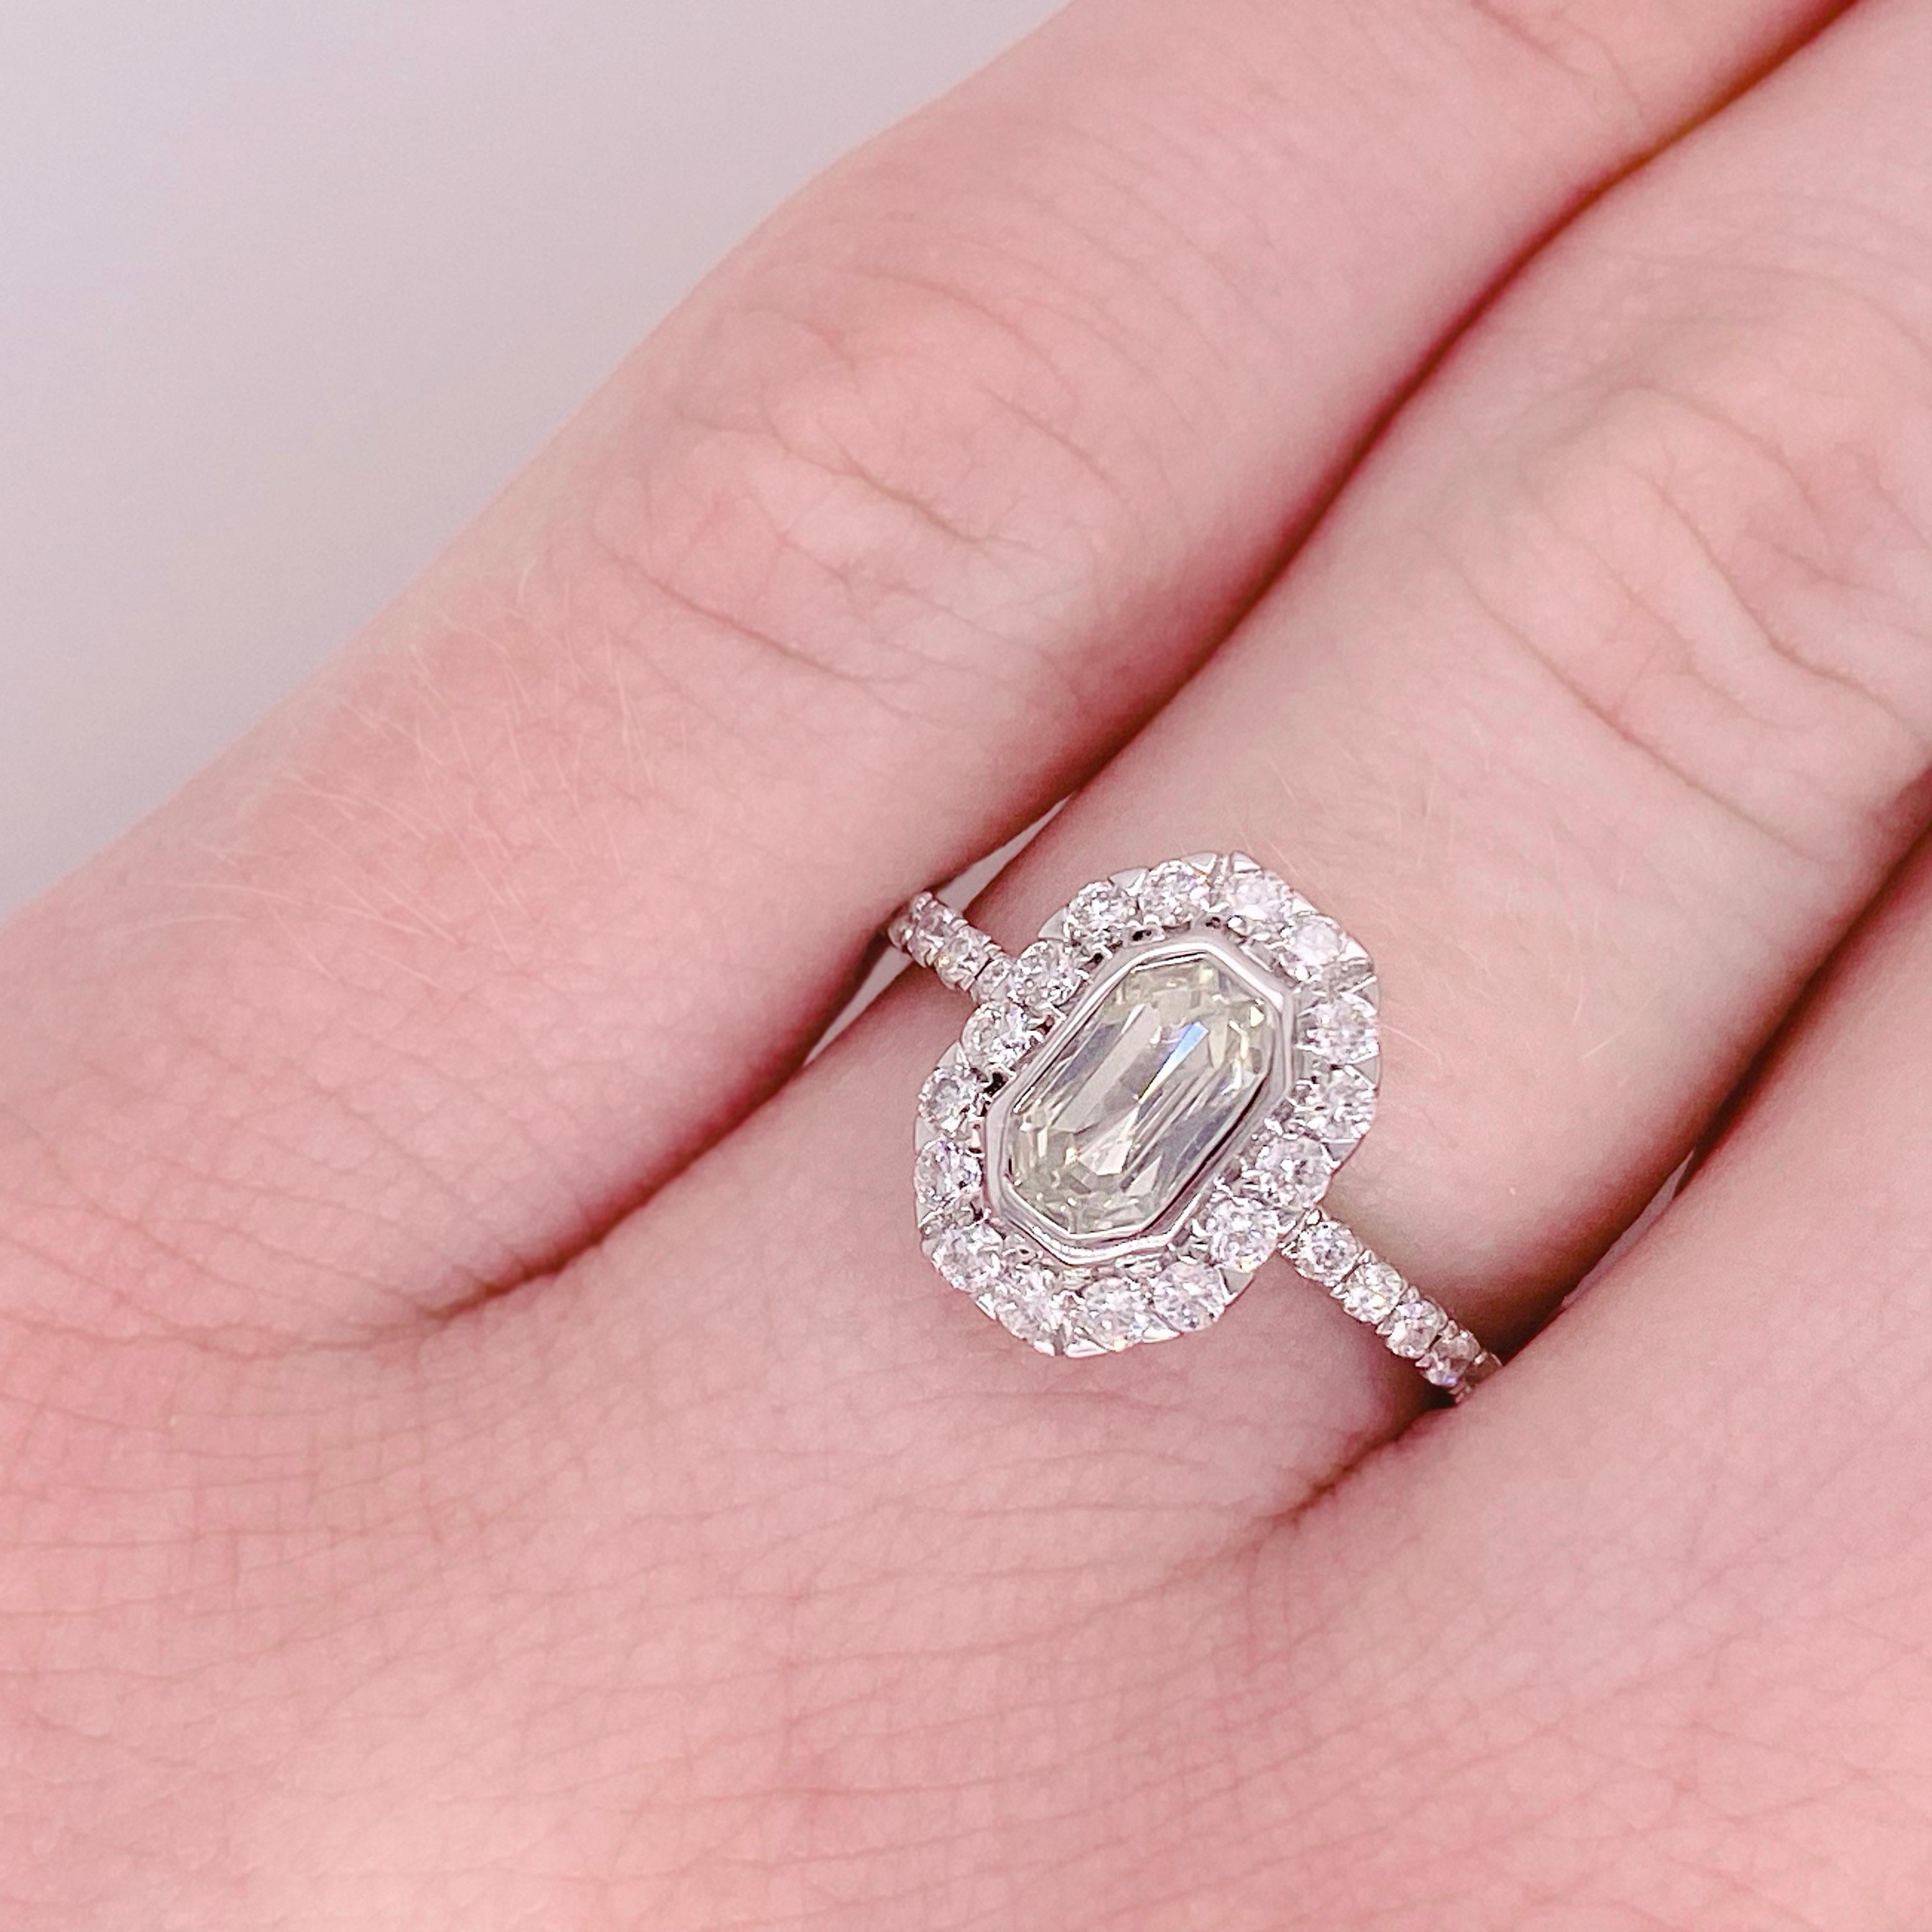 Vintage Inspired Emerald cut Diamond Engagement ring with Brilliant Diamond Halo

 This is a beautiful french cut engagement ring, its dainty design has the power of making any wearer feel beautiful, one of a kind, and decadent! With a .73 carat